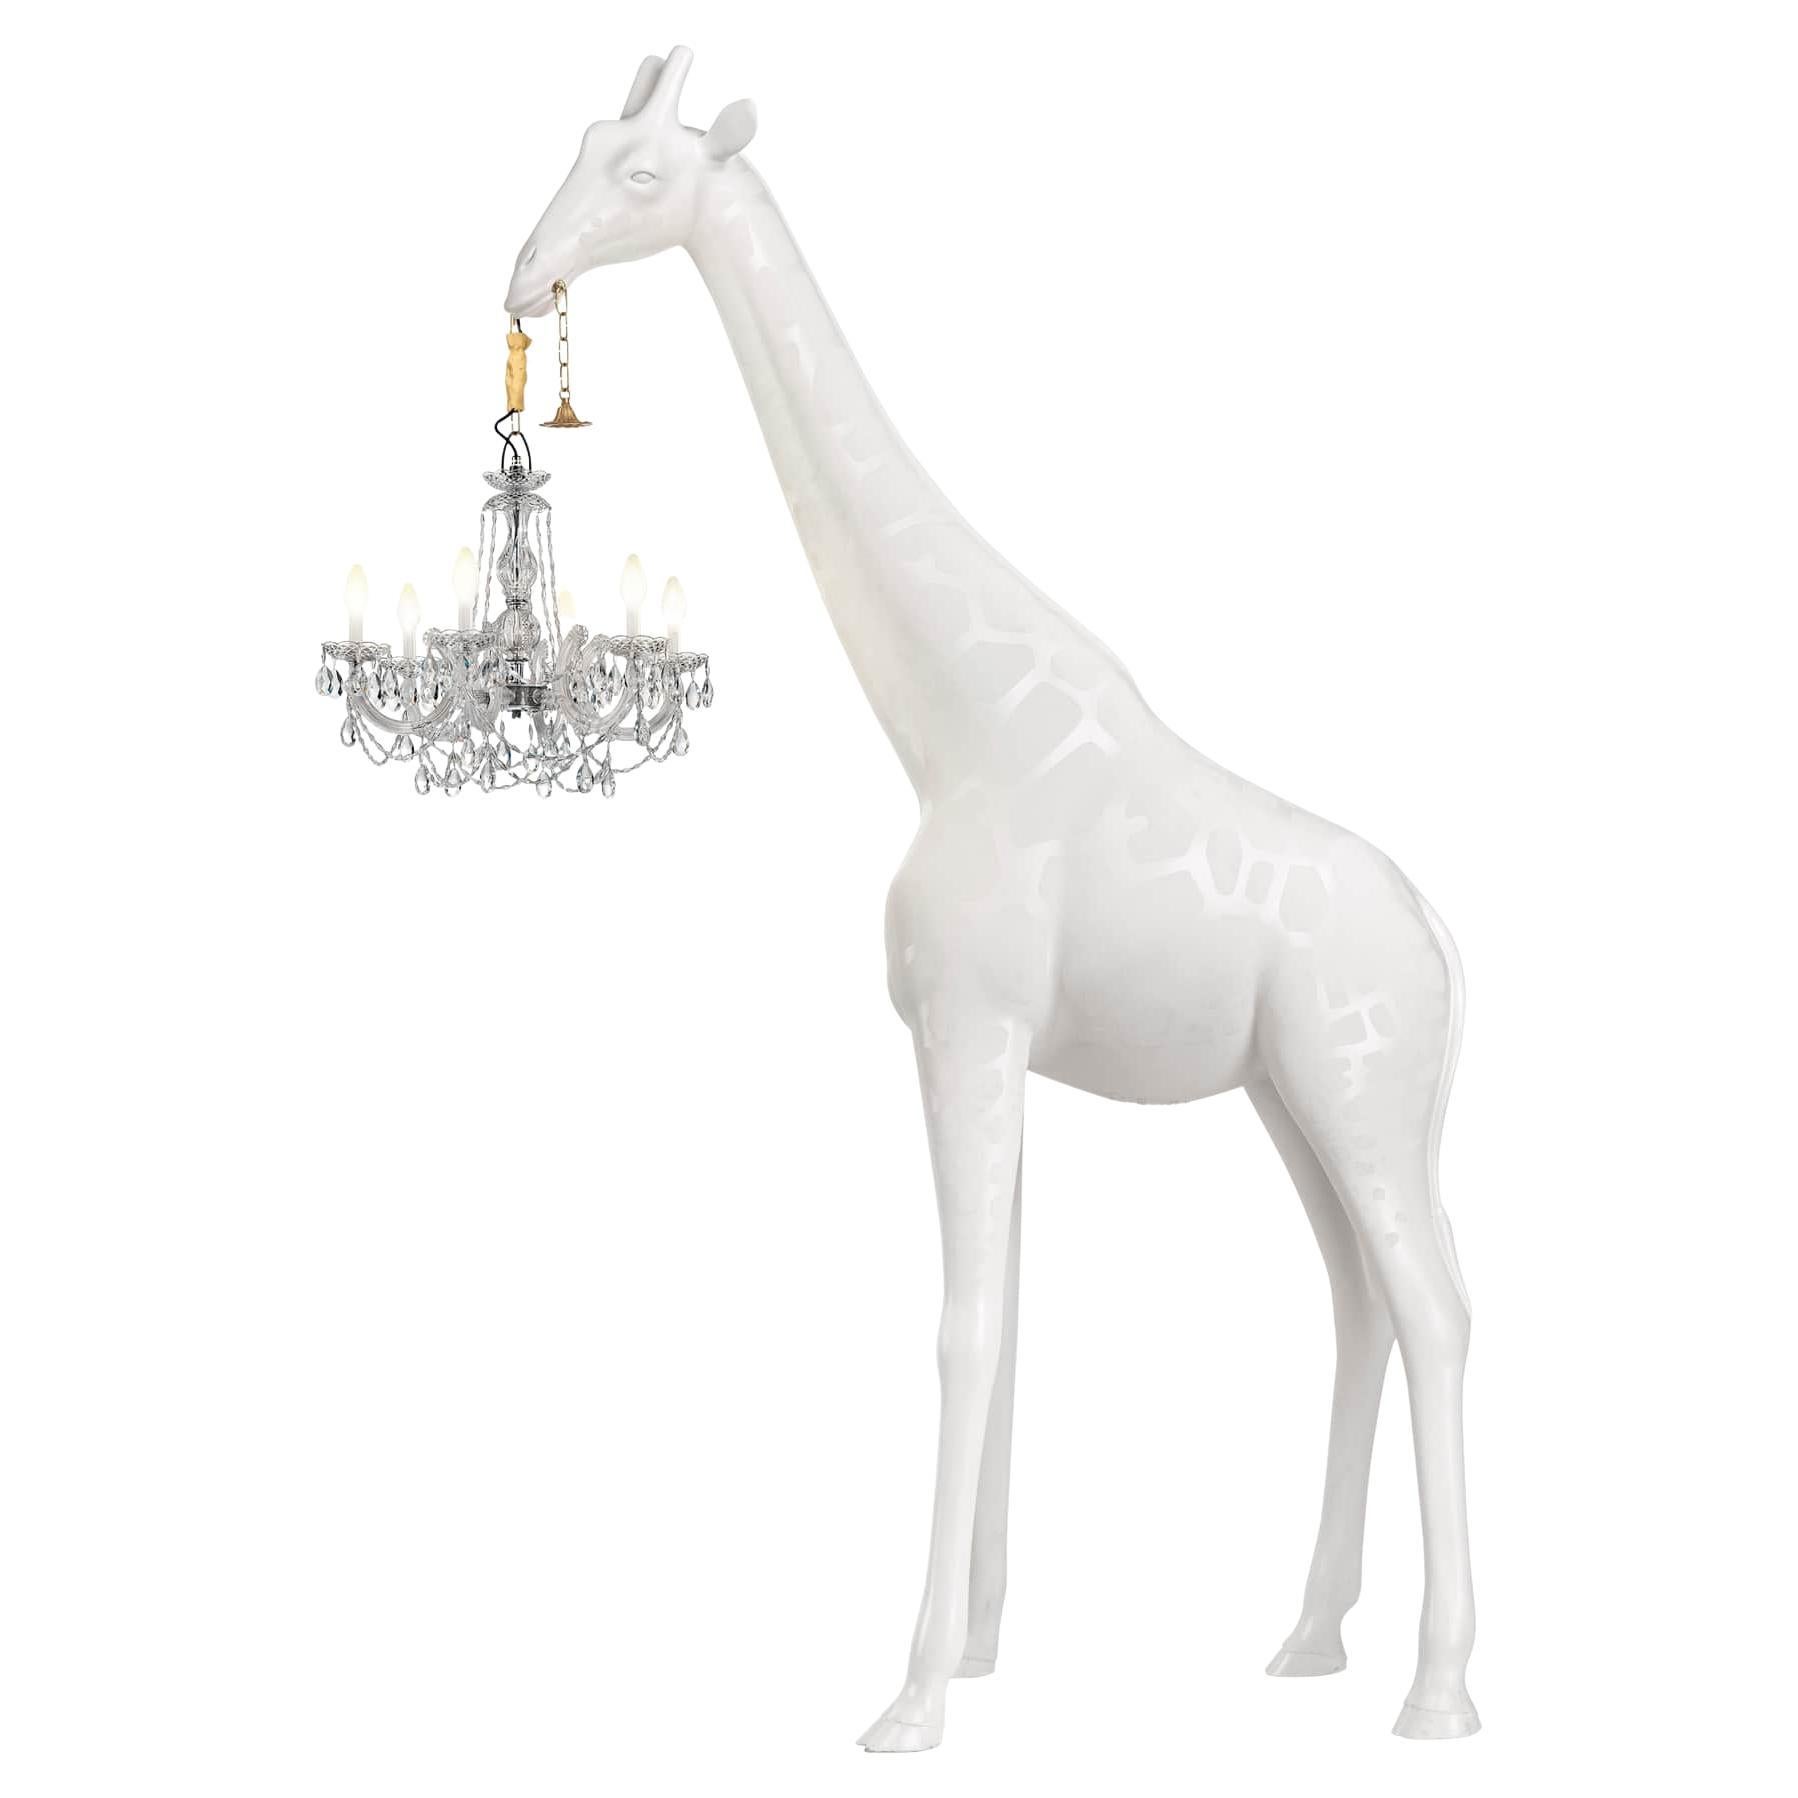 White Outdoor Giraffe w/ Chandelier by Marcantonio, Made in Italy